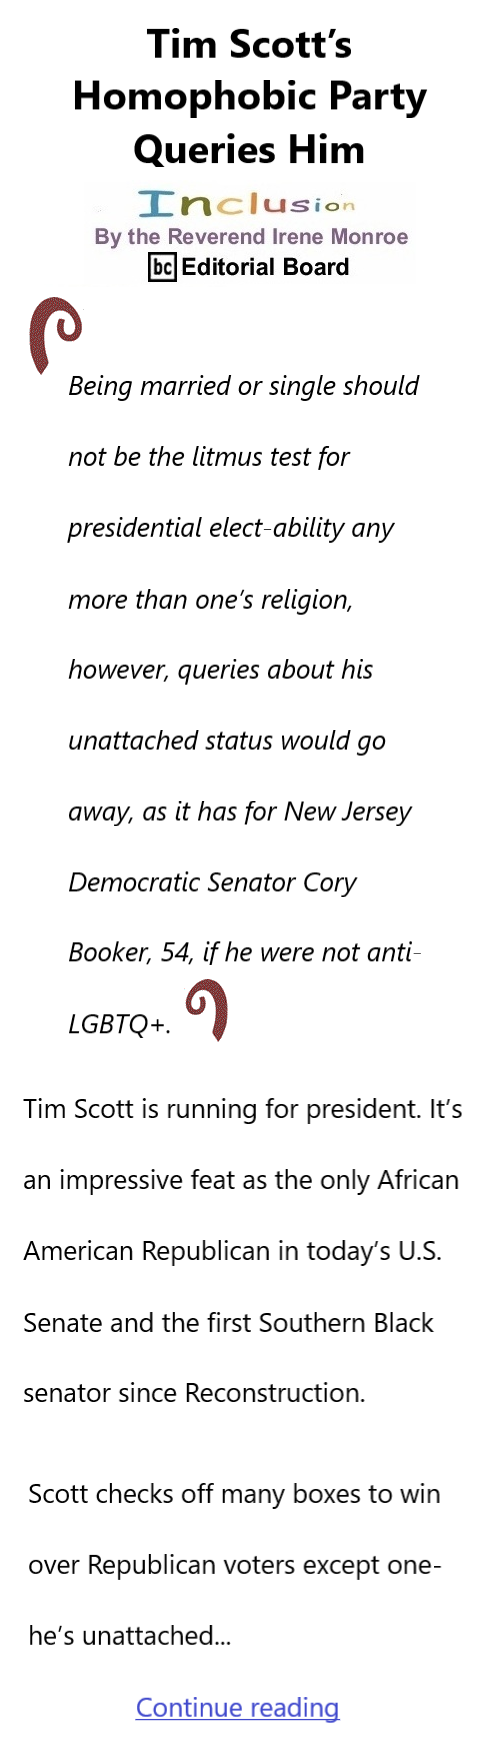 BlackCommentator.com Sept 21, 2023 - Issue 970: Tim Scott’s Homophobic Party Queries Him - Inclusion By The Reverend Irene Monroe, BC Editorial Board